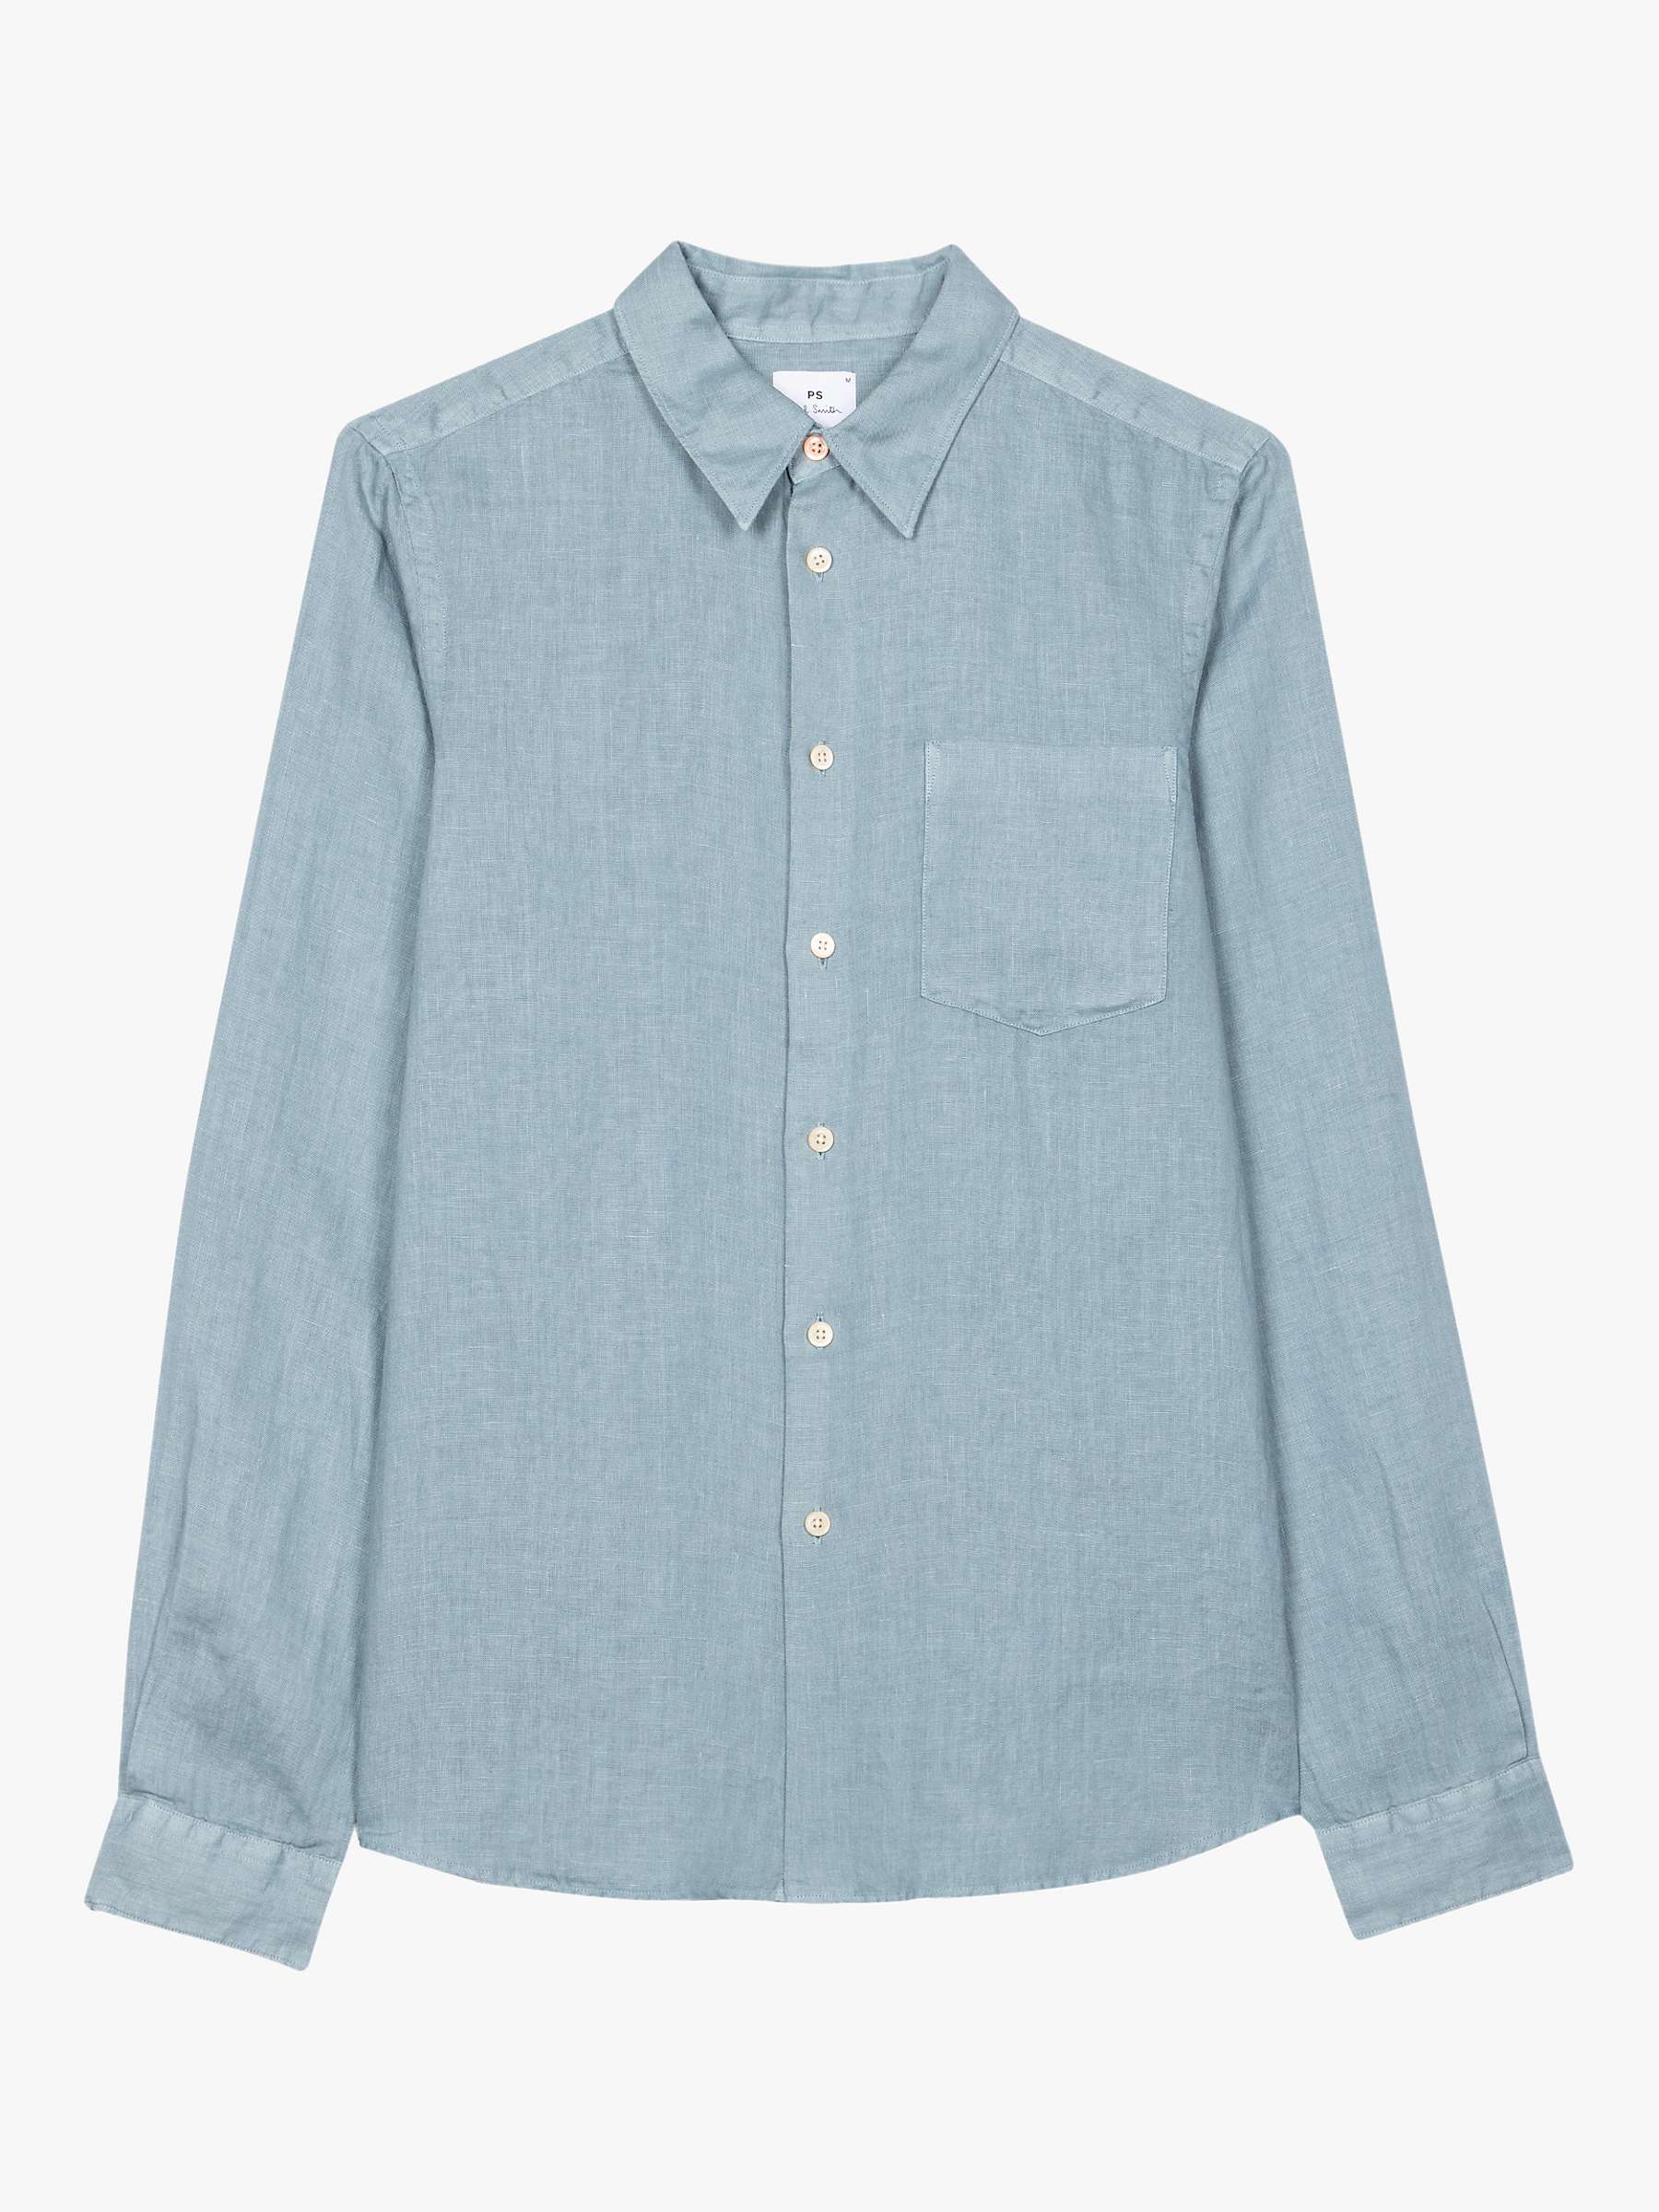 Buy Paul Smith Long Sleeve Tailored Fit Shirt Online at johnlewis.com